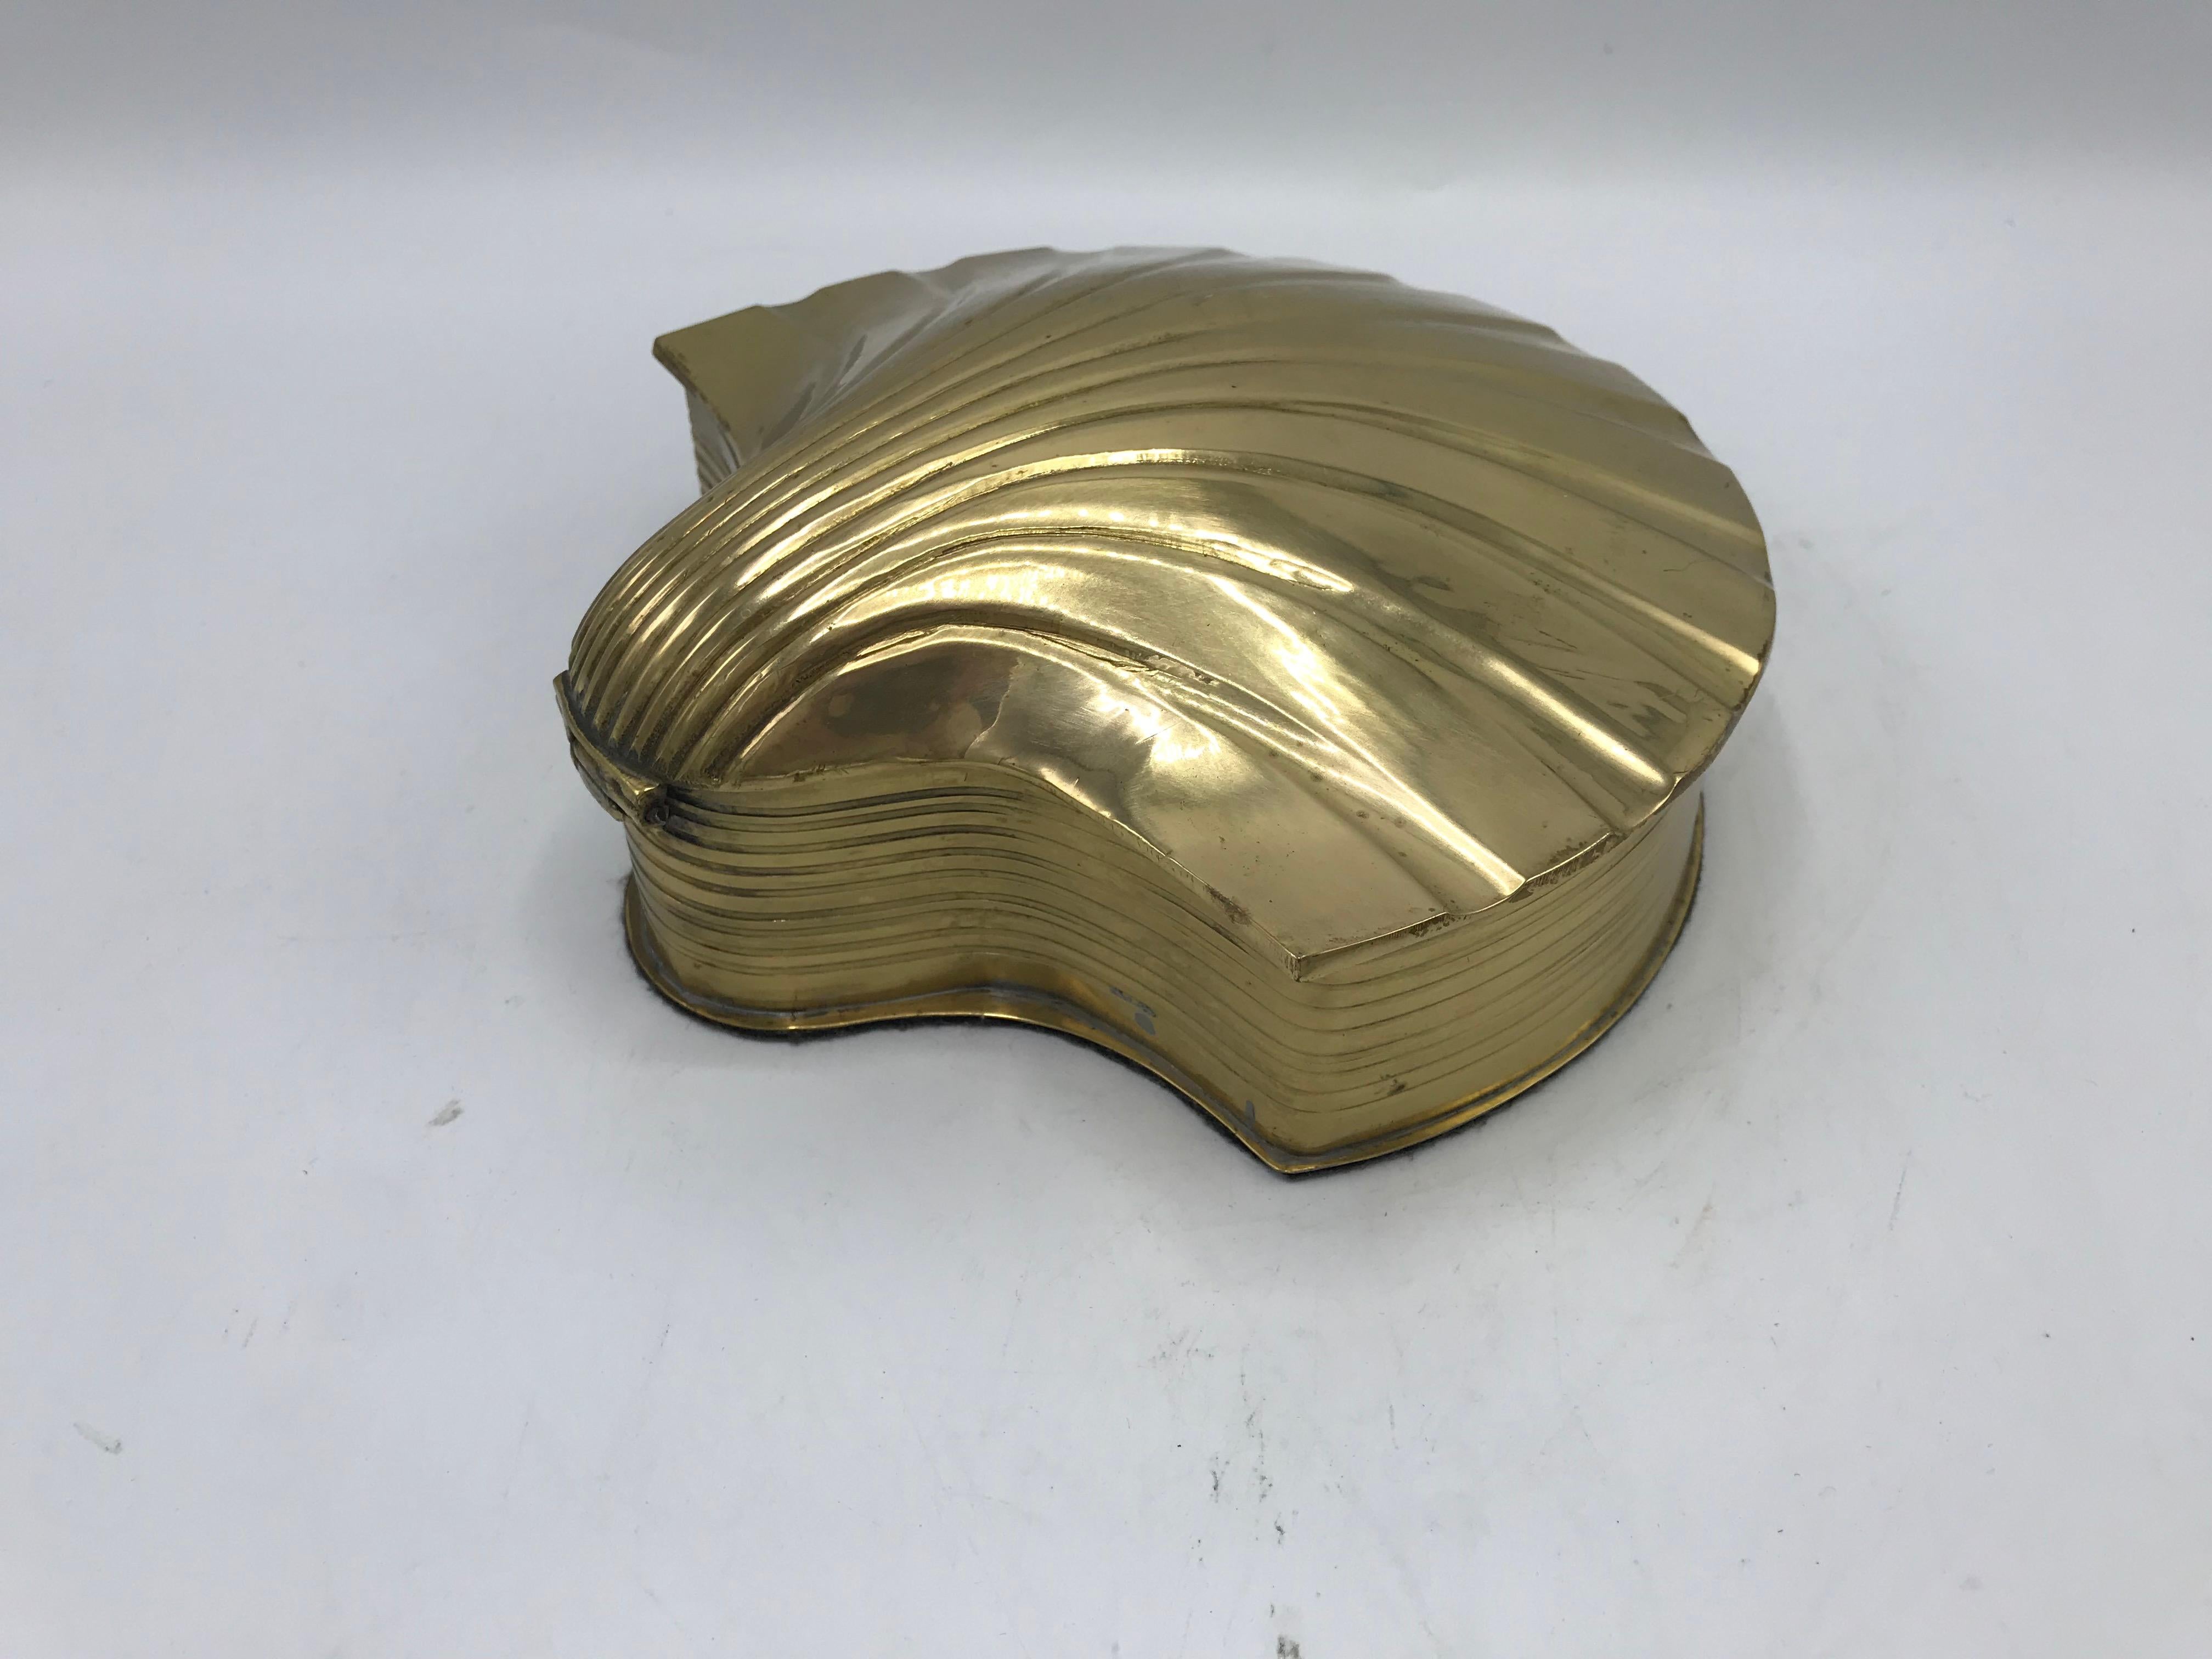 Offered is a gorgeous, 1960s polished brass box in the shape of a seashell. Hinged with felt interior and bottom. Heavy.